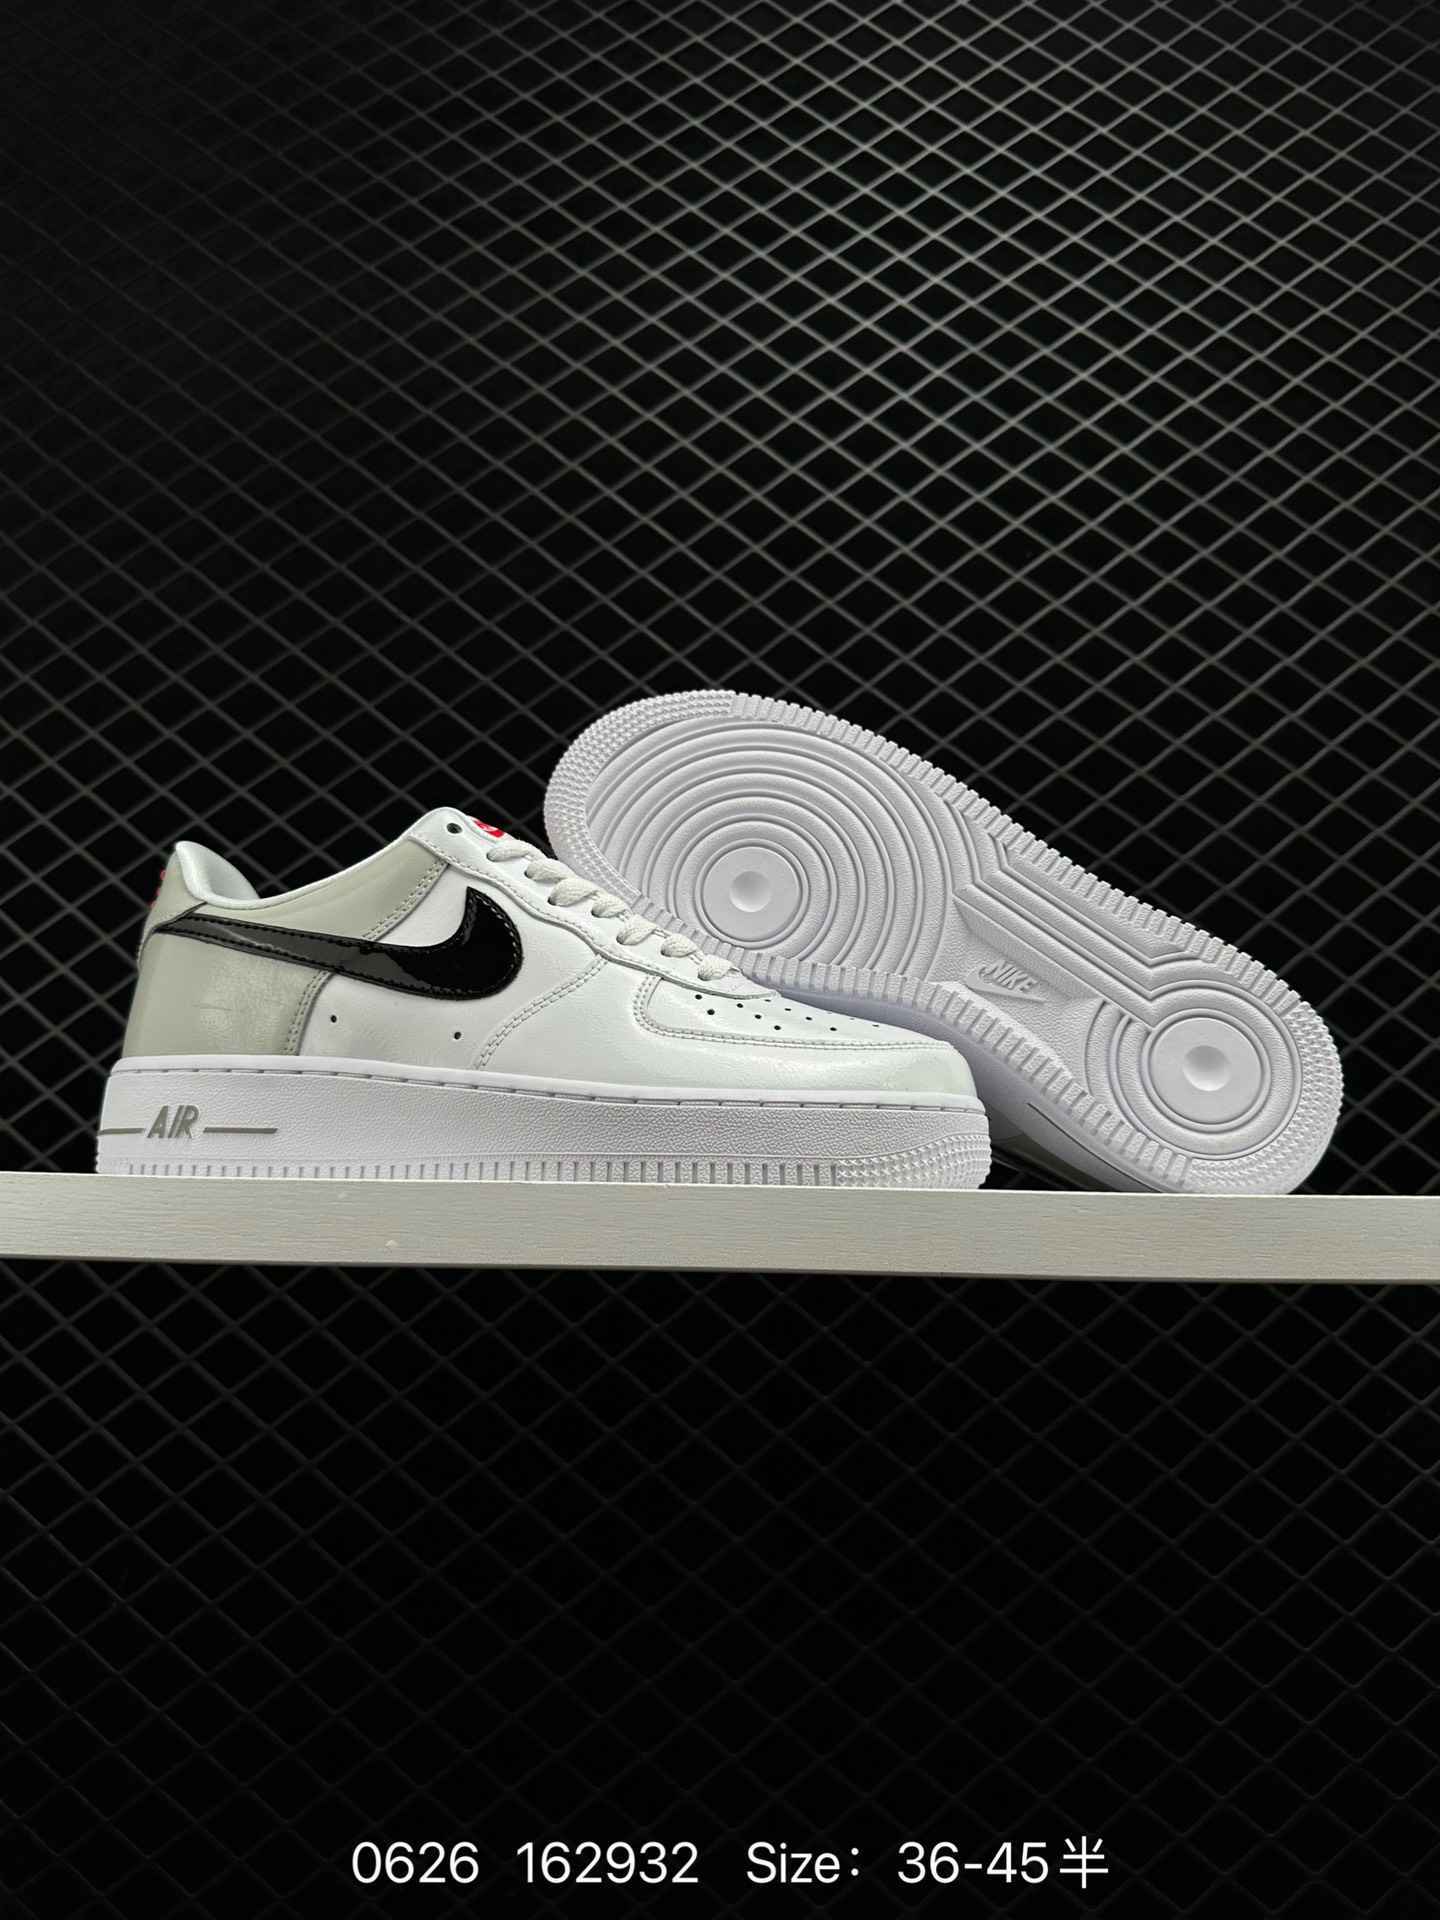 6 Corporate Nike Air Force Low Air Force One low top casual sneakers. The soft and elastic cushionin